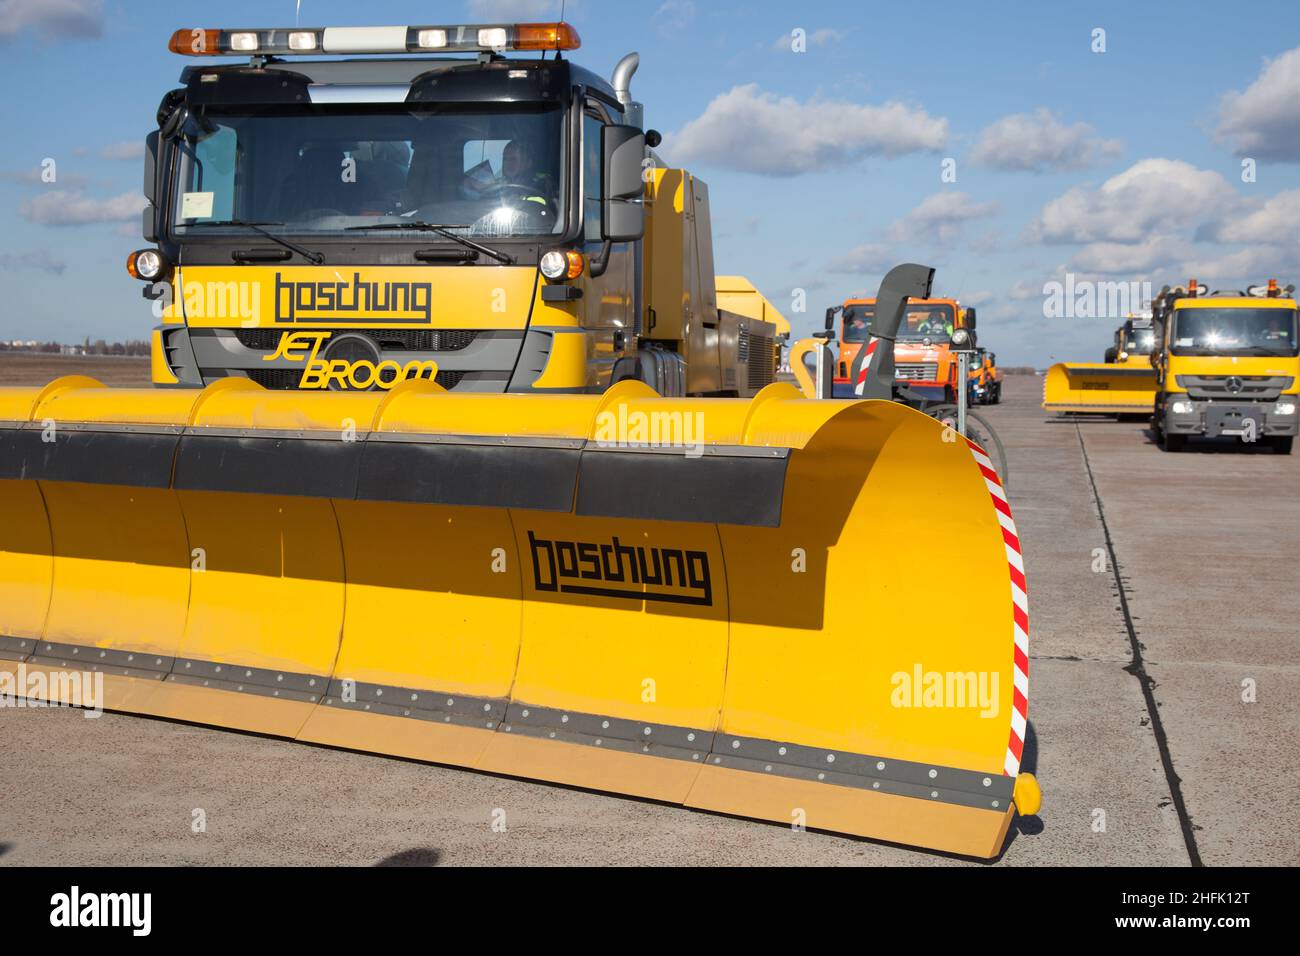 Kyiv, Ukraine - October 29, 2019: BOSCHUNG JETBROOM 9600 snow removal. Multifunctional dump truck cleaning system for airports and highways. Utility machinery -a truck with a large blade and a bucket Stock Photo